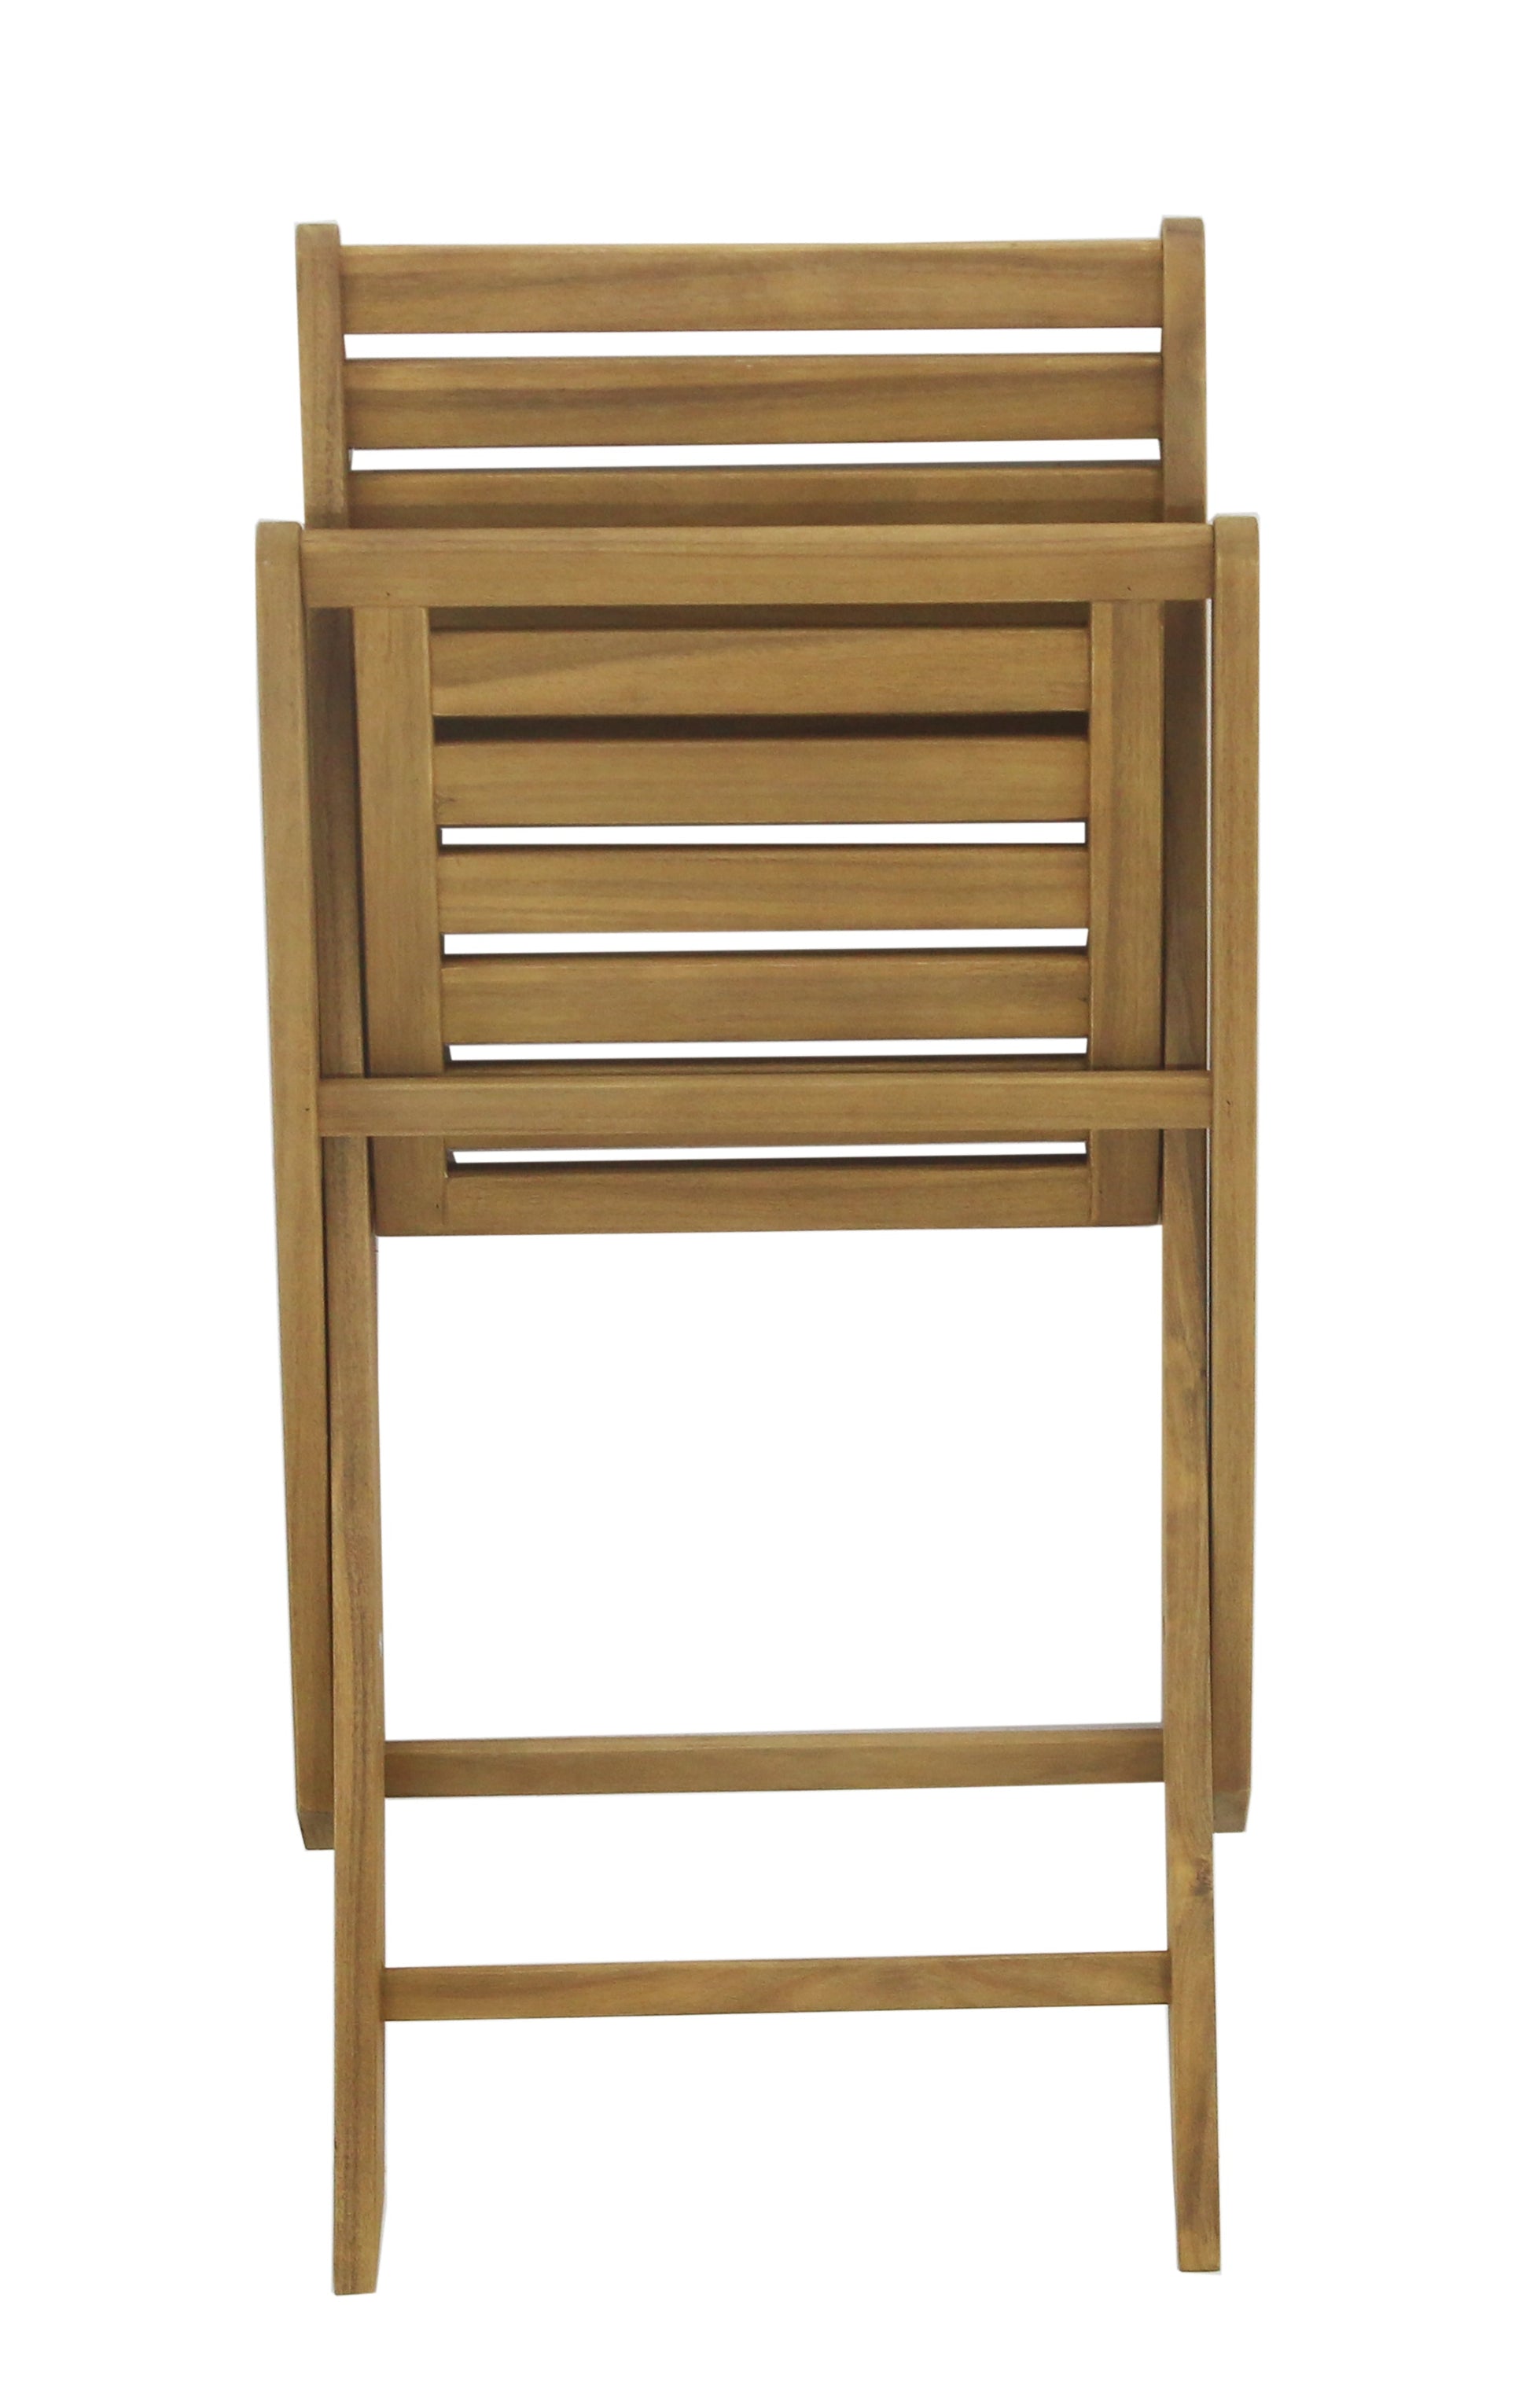 Outdoor dining chairs - set of 2 - solid acacia wood